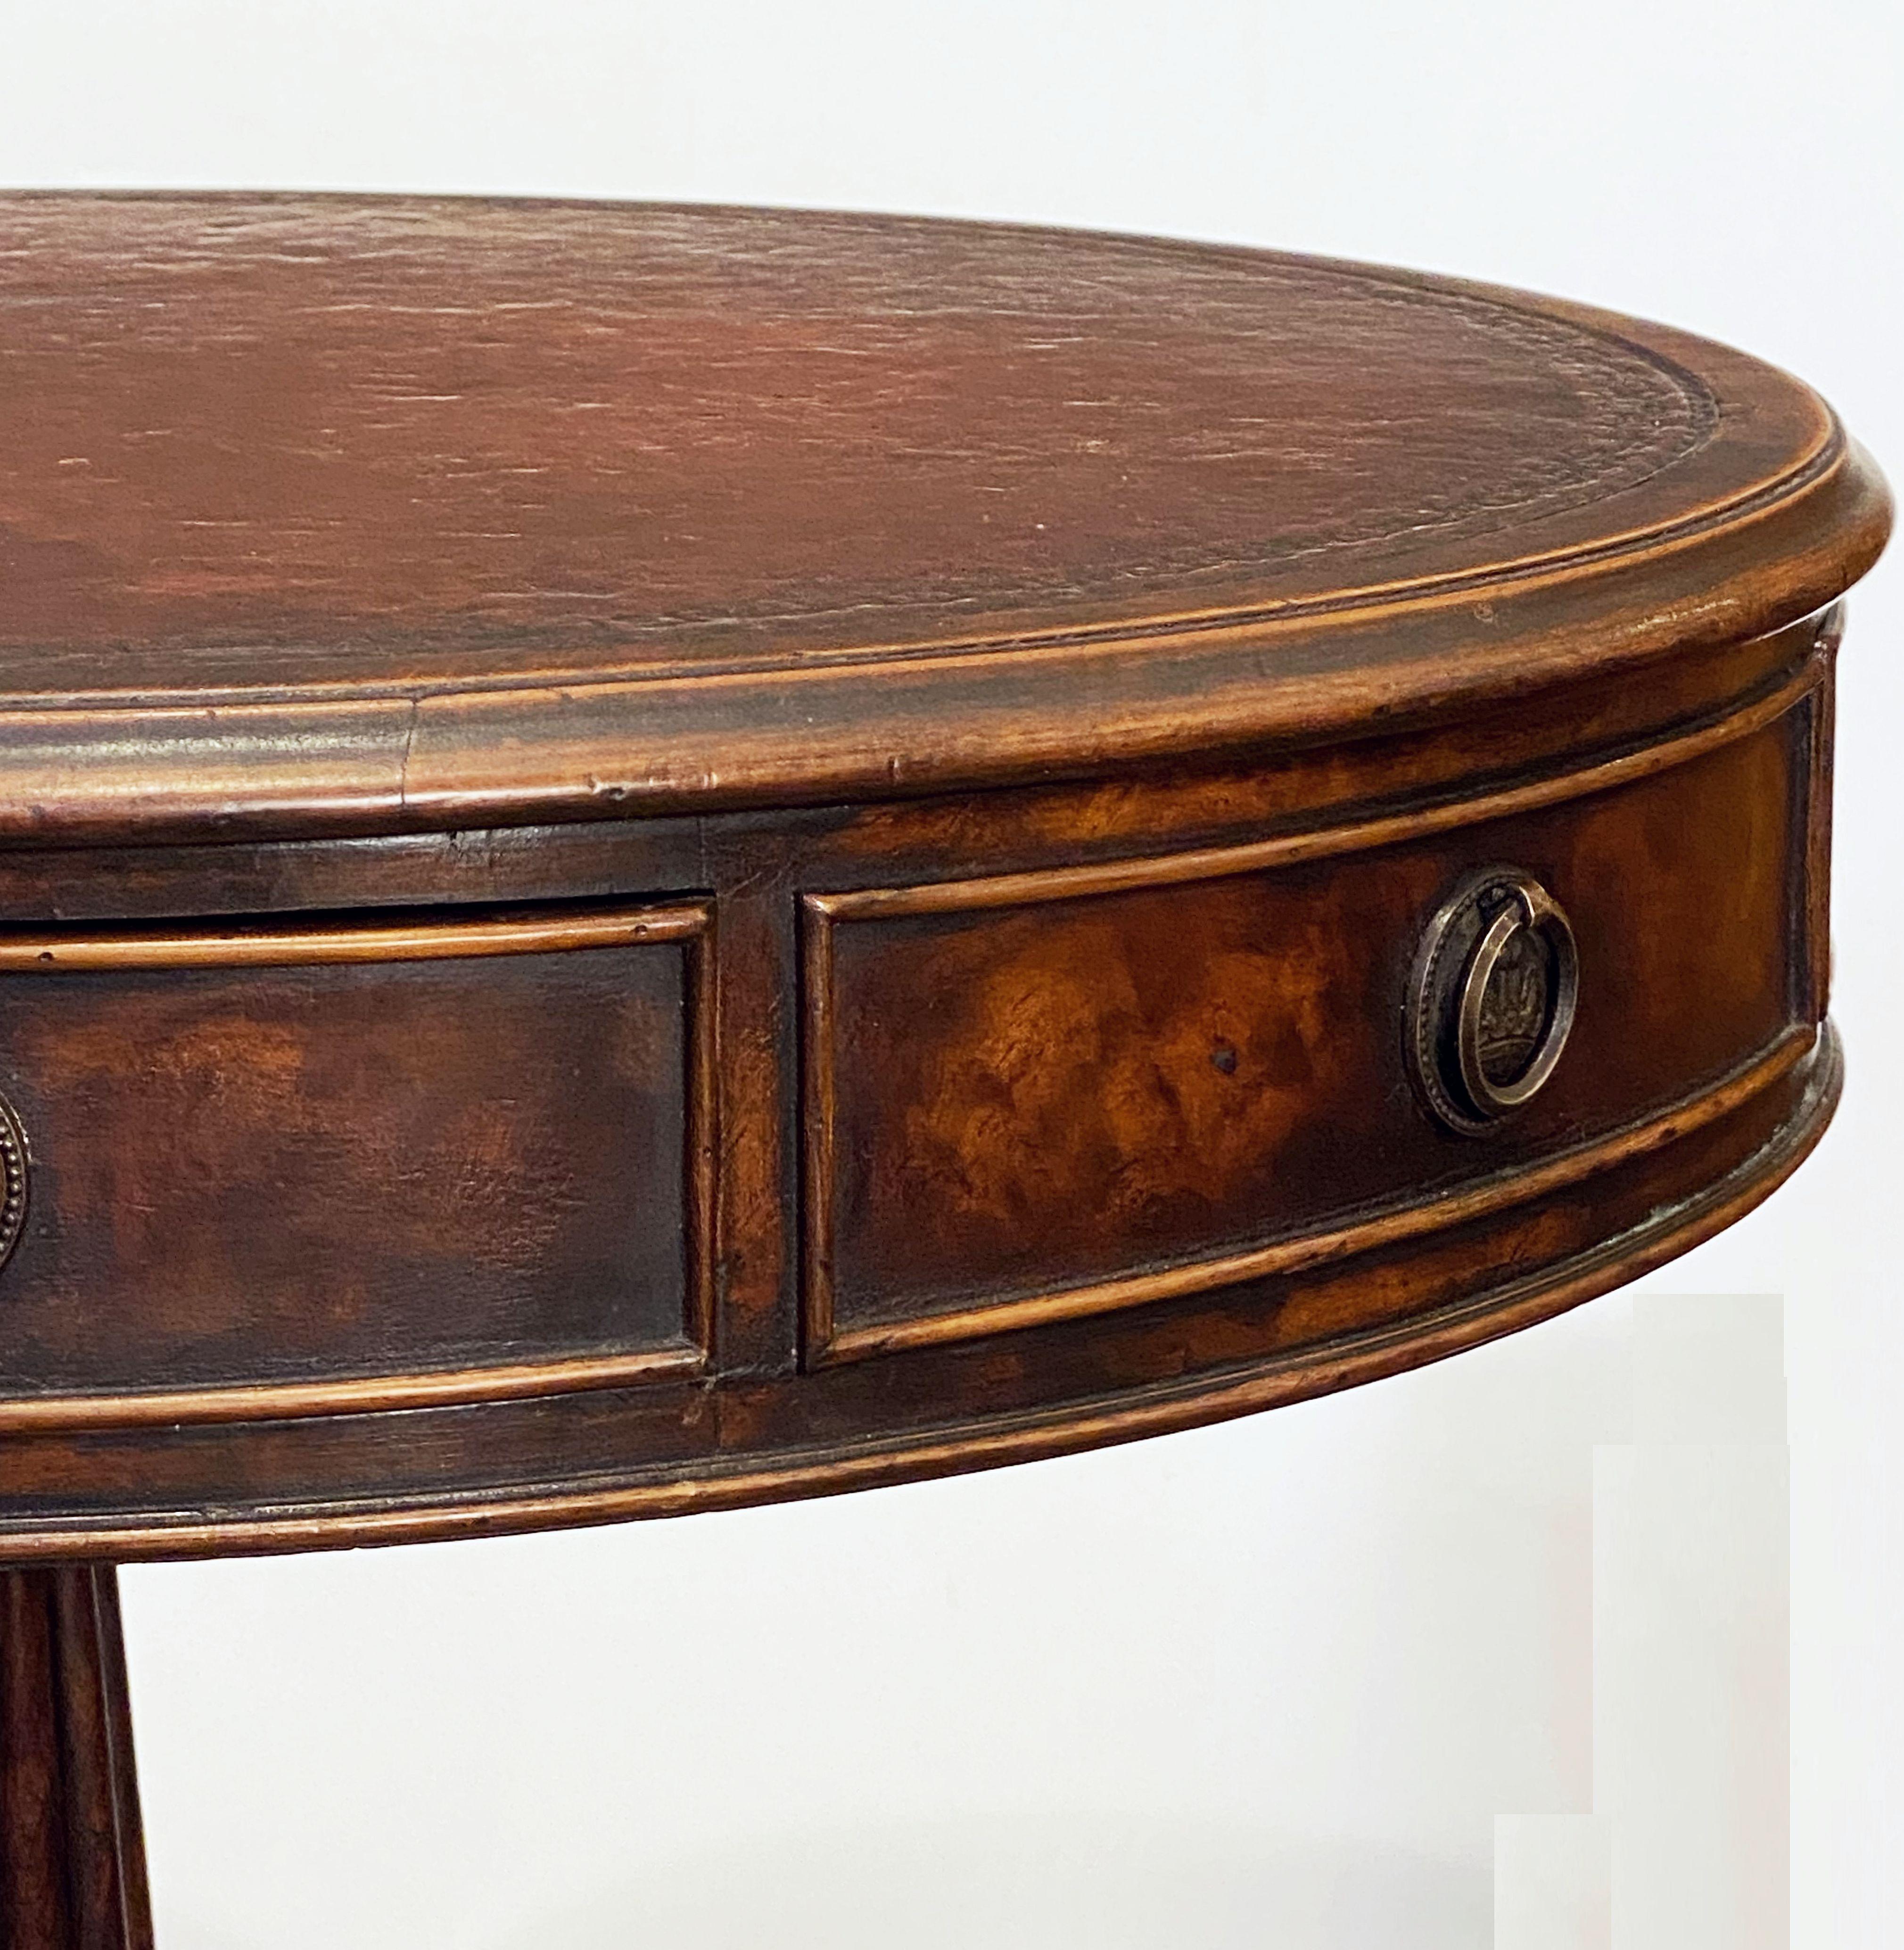 English Drum Table of Mahogany with Leather Top from the Edwardian Era For Sale 2